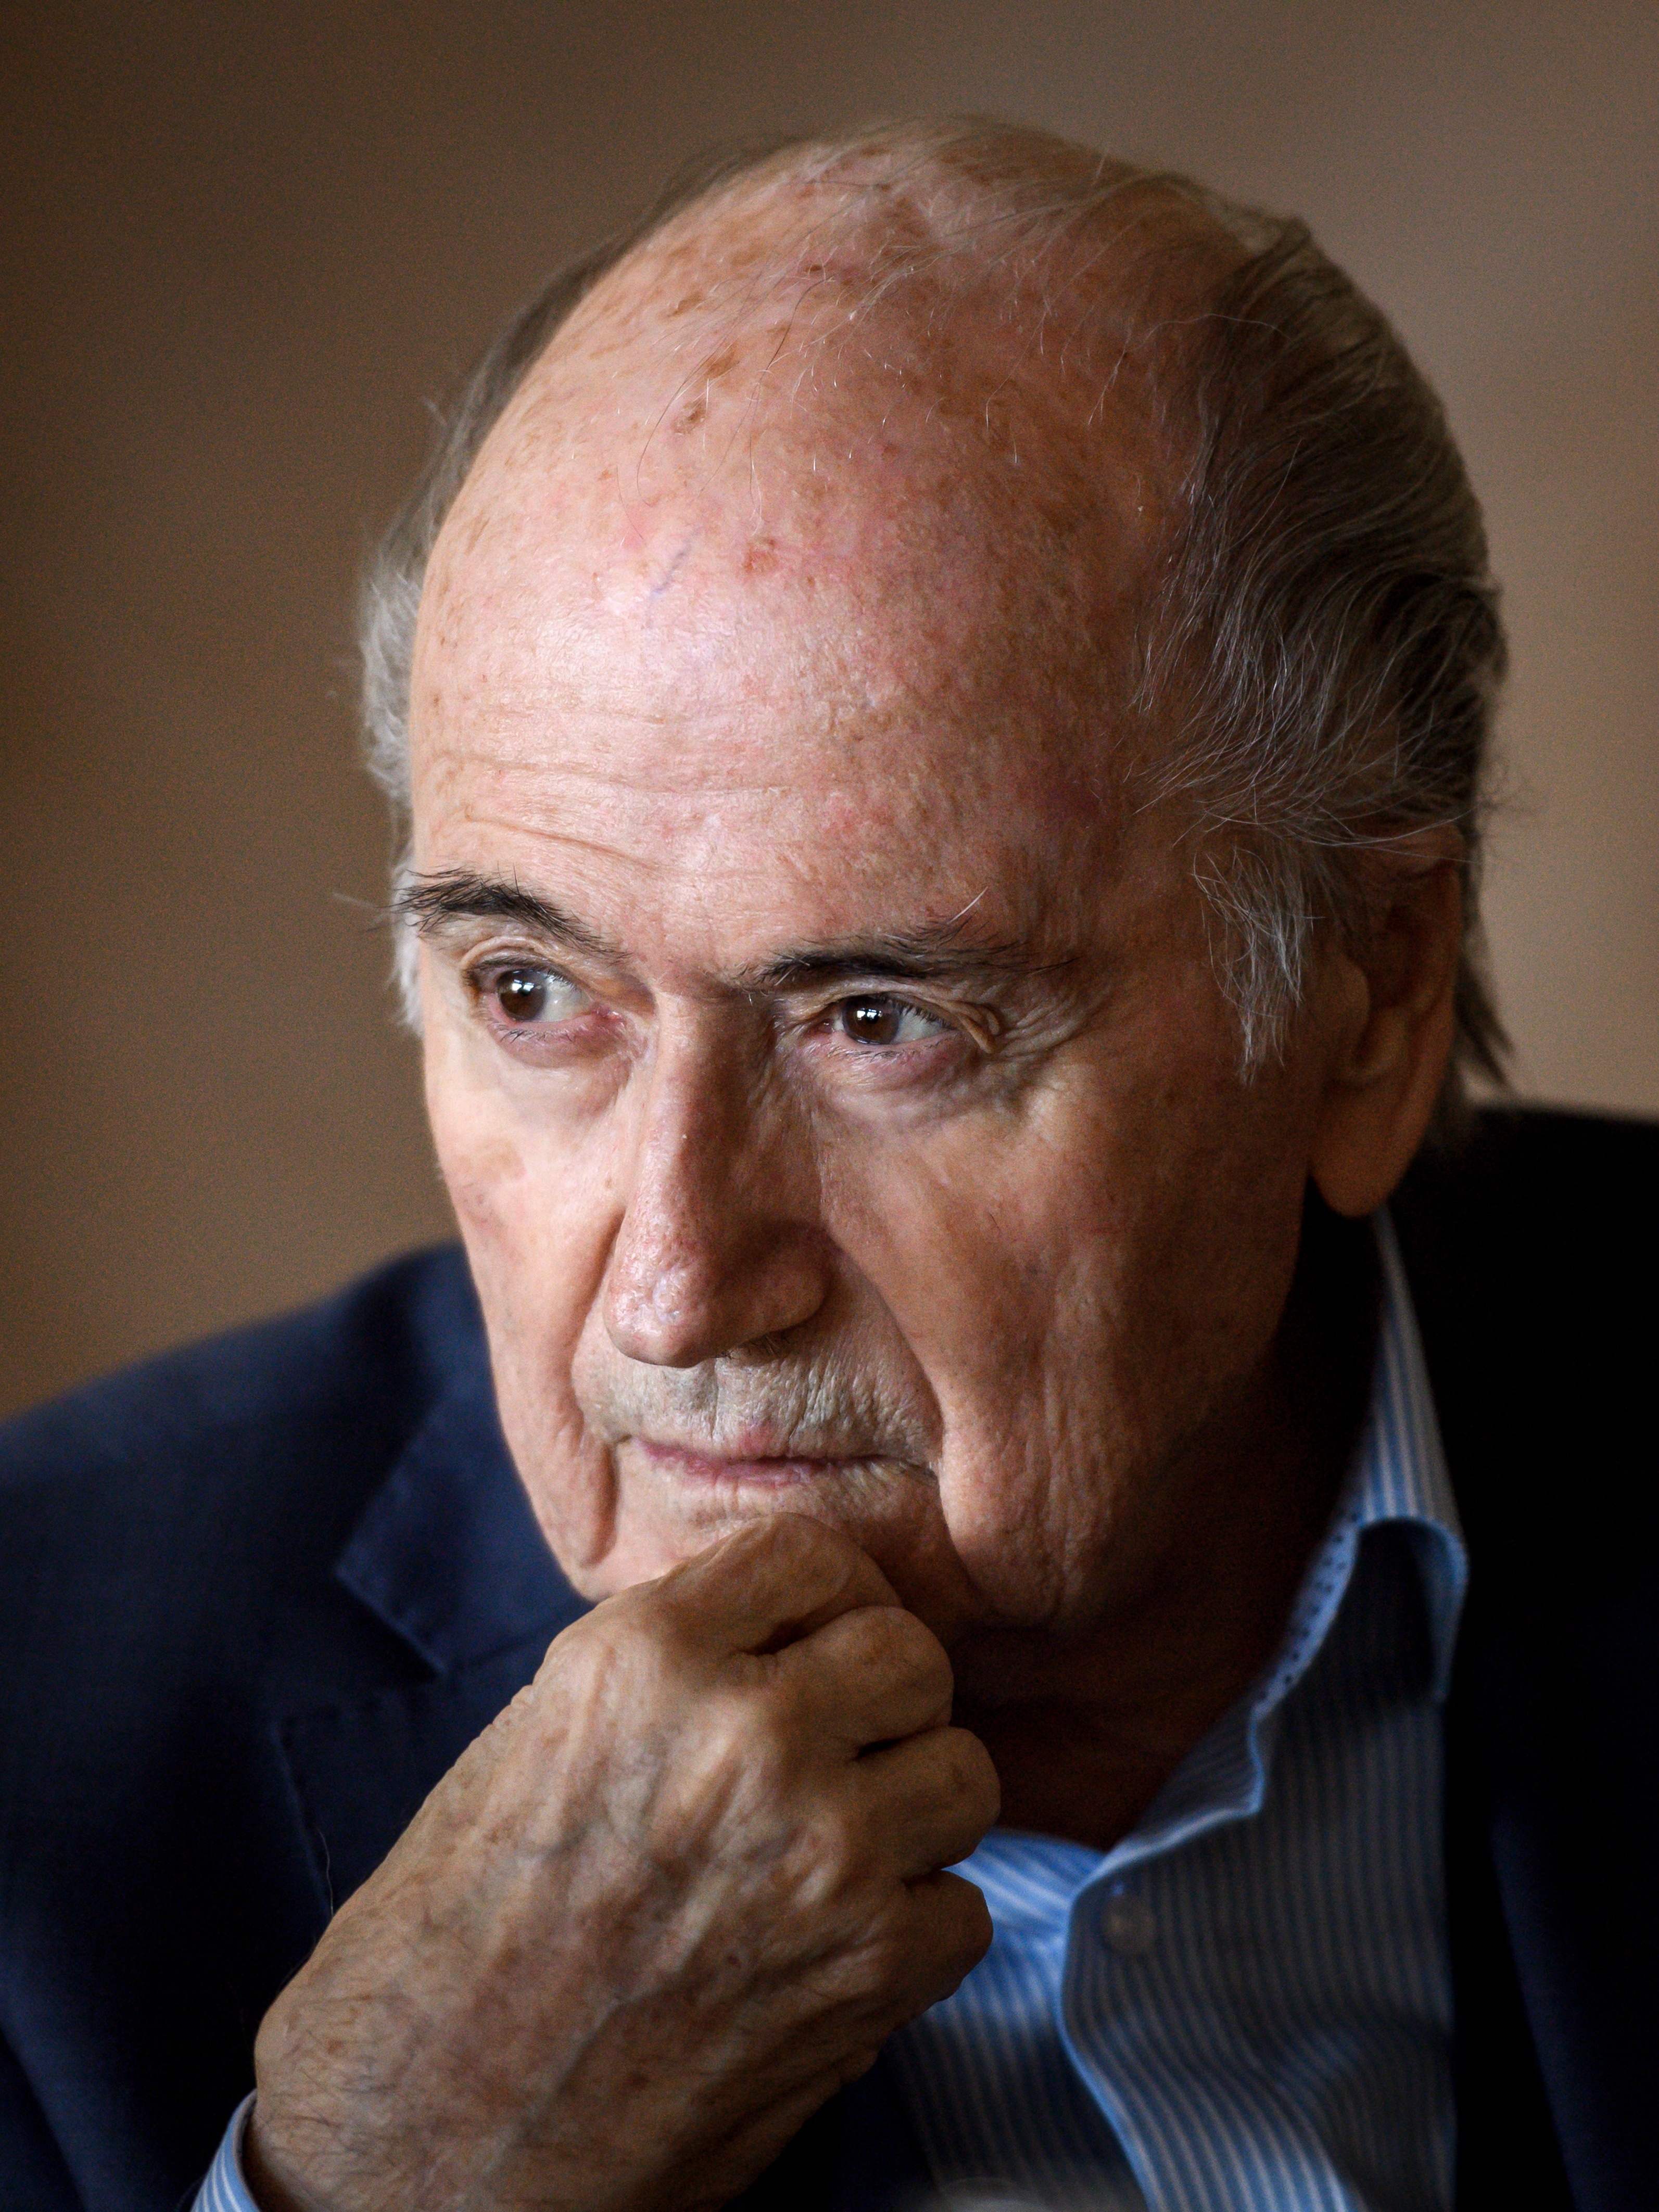 Sepp Blatter was FIFA president from 1998 to 2015